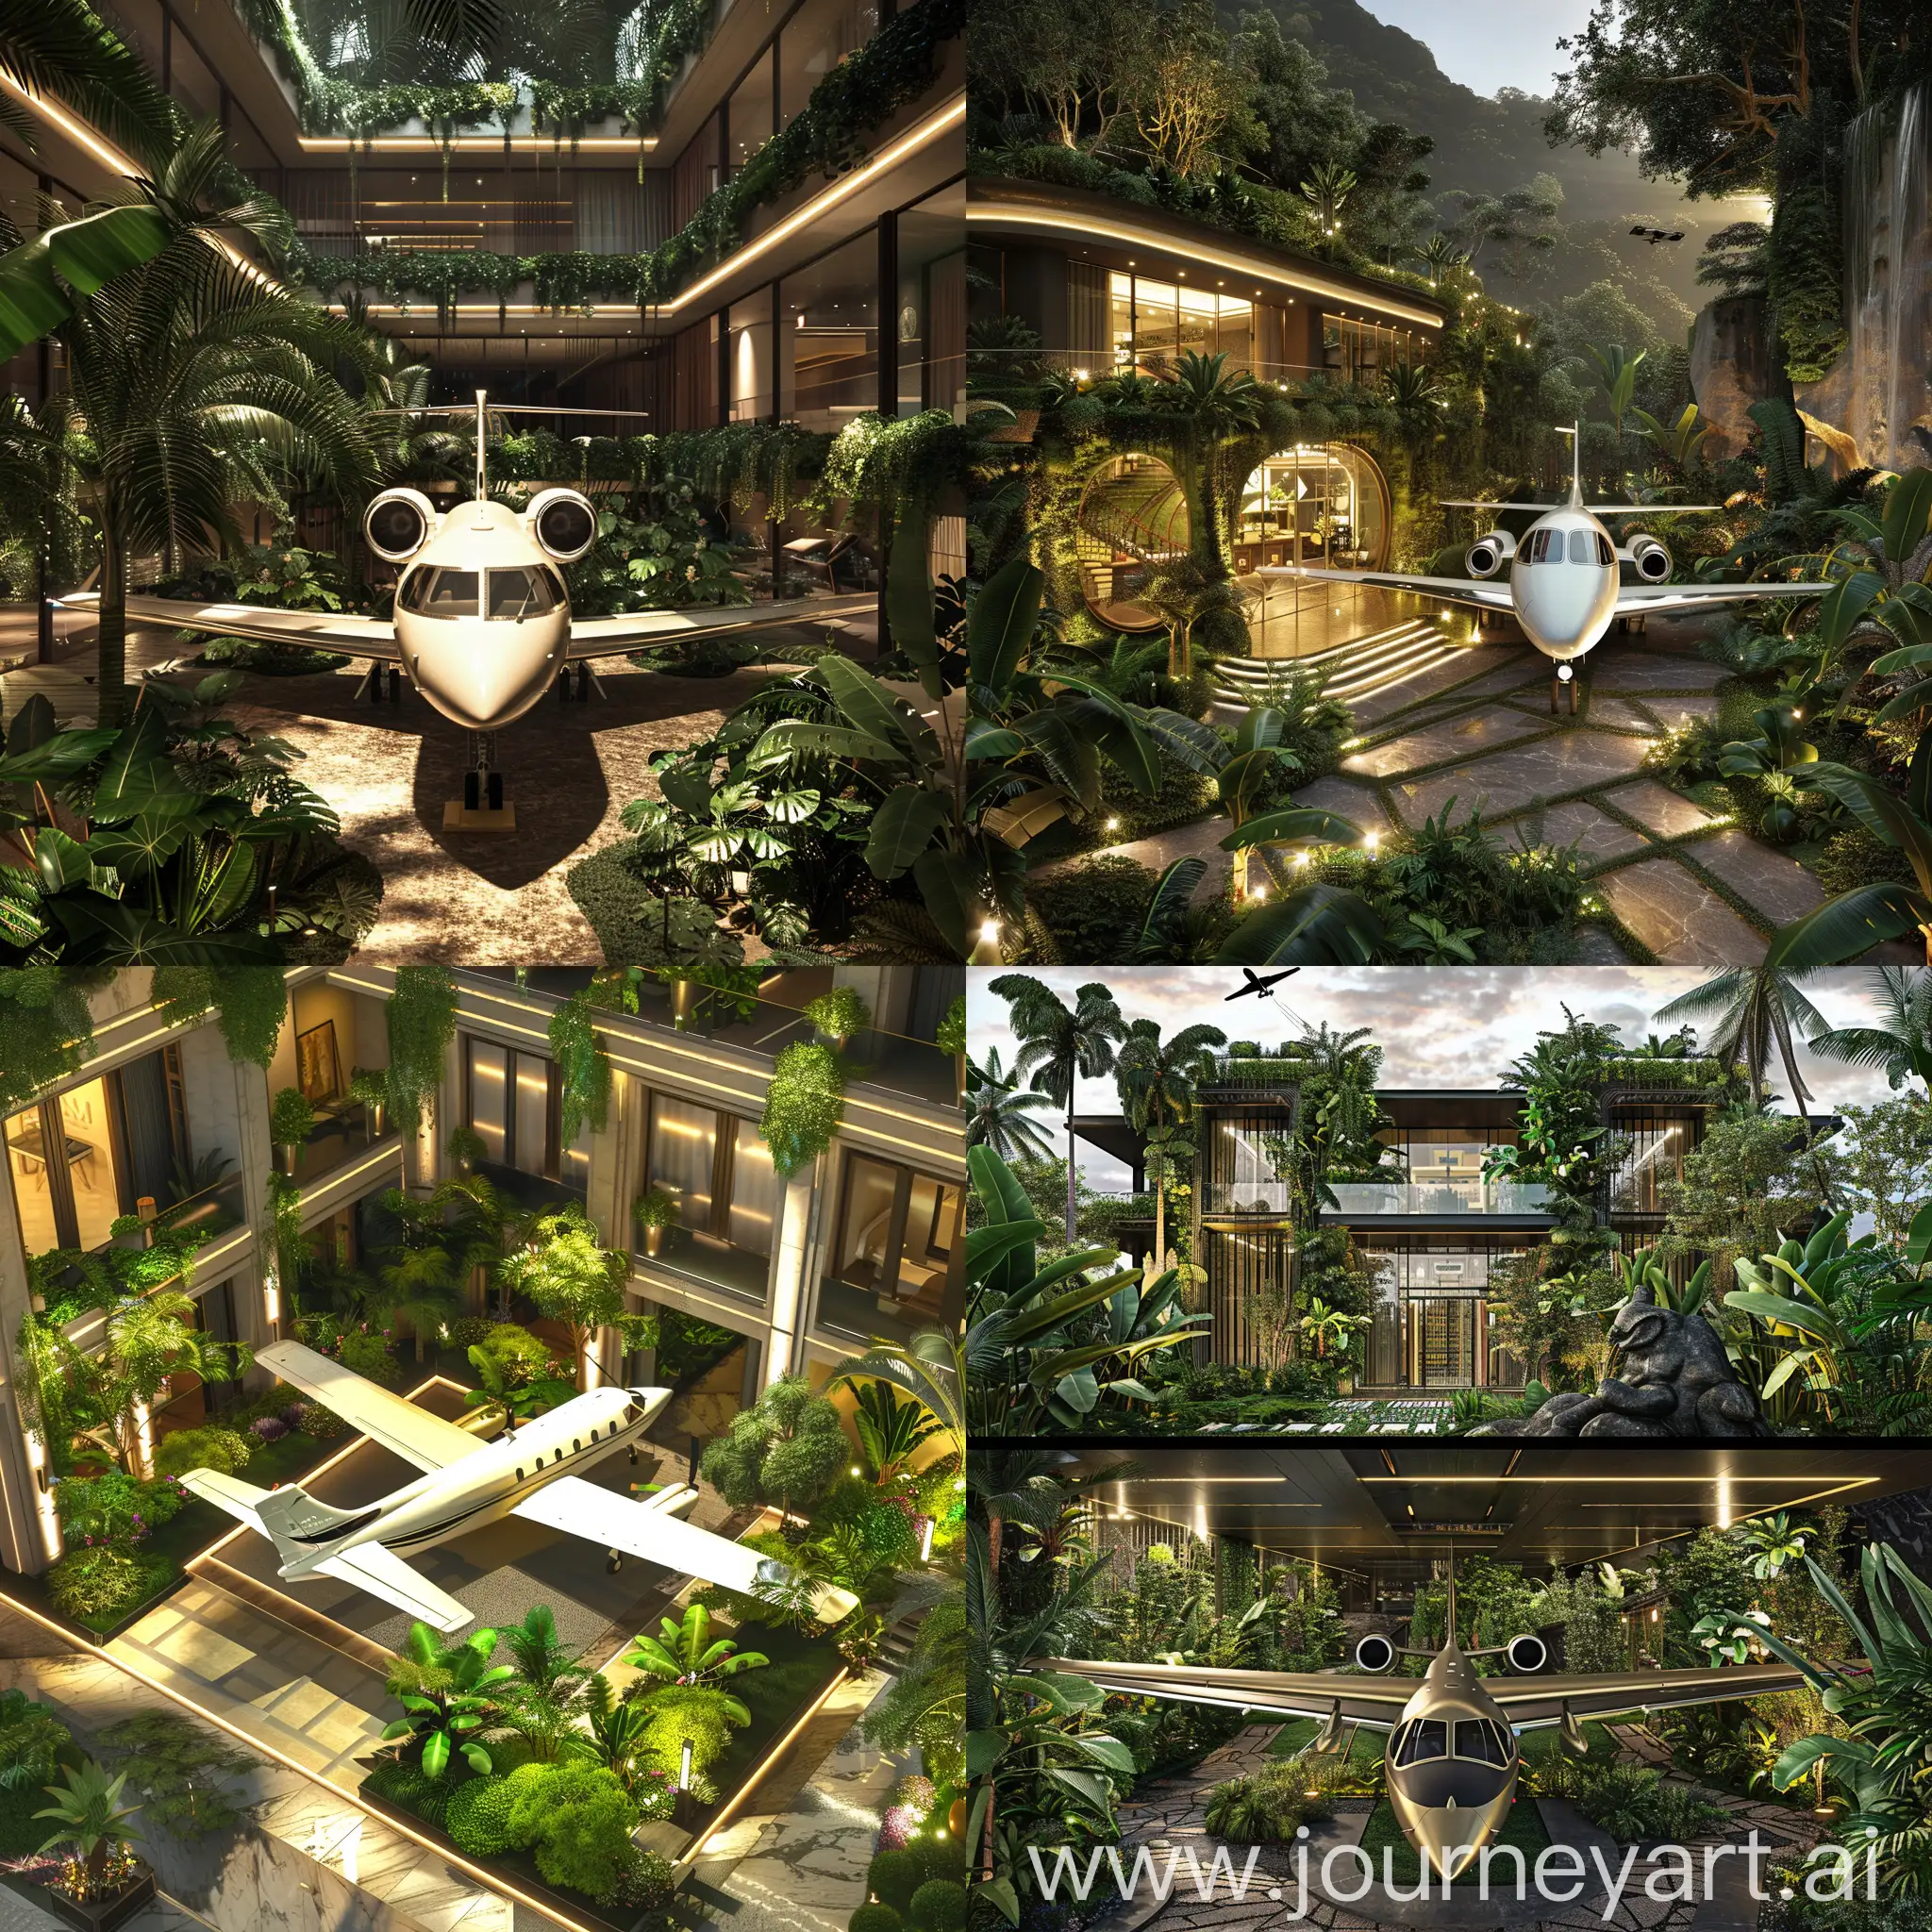 Luxurious-Elite-Hotel-with-Private-Garden-and-Personal-Plane